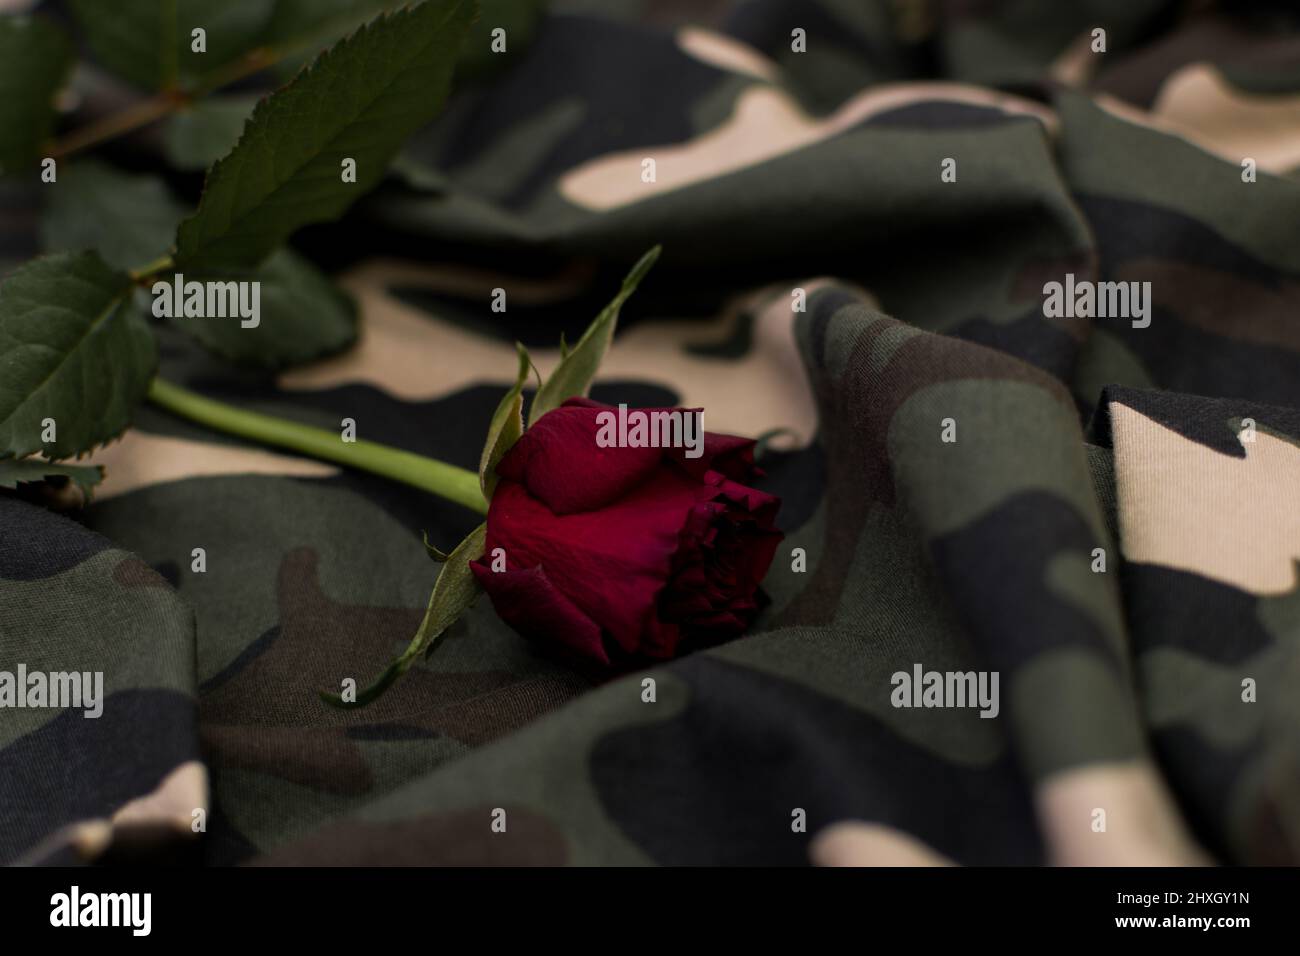 Close up of red rose on military camouflage uniform uniform Stock Photo